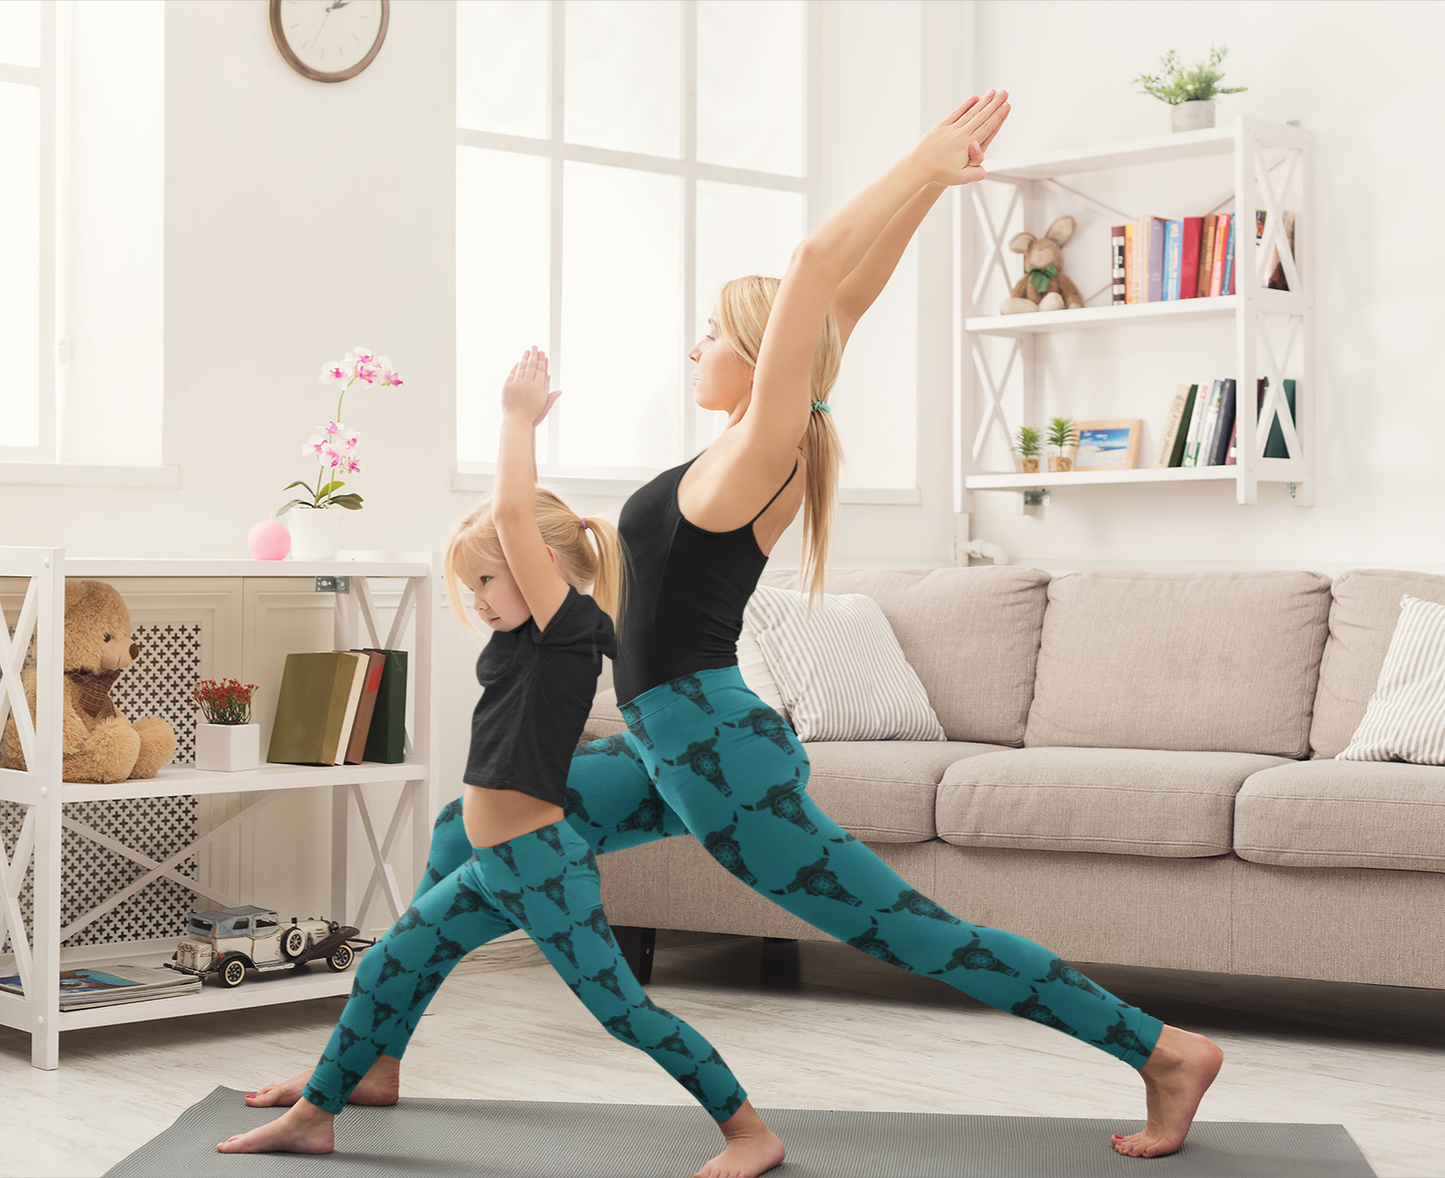 A woman and her daughter doing yoga Warrior pose, wearing high waisted teal yoga style leggings with a black bison skull pattern and black tops in their living room